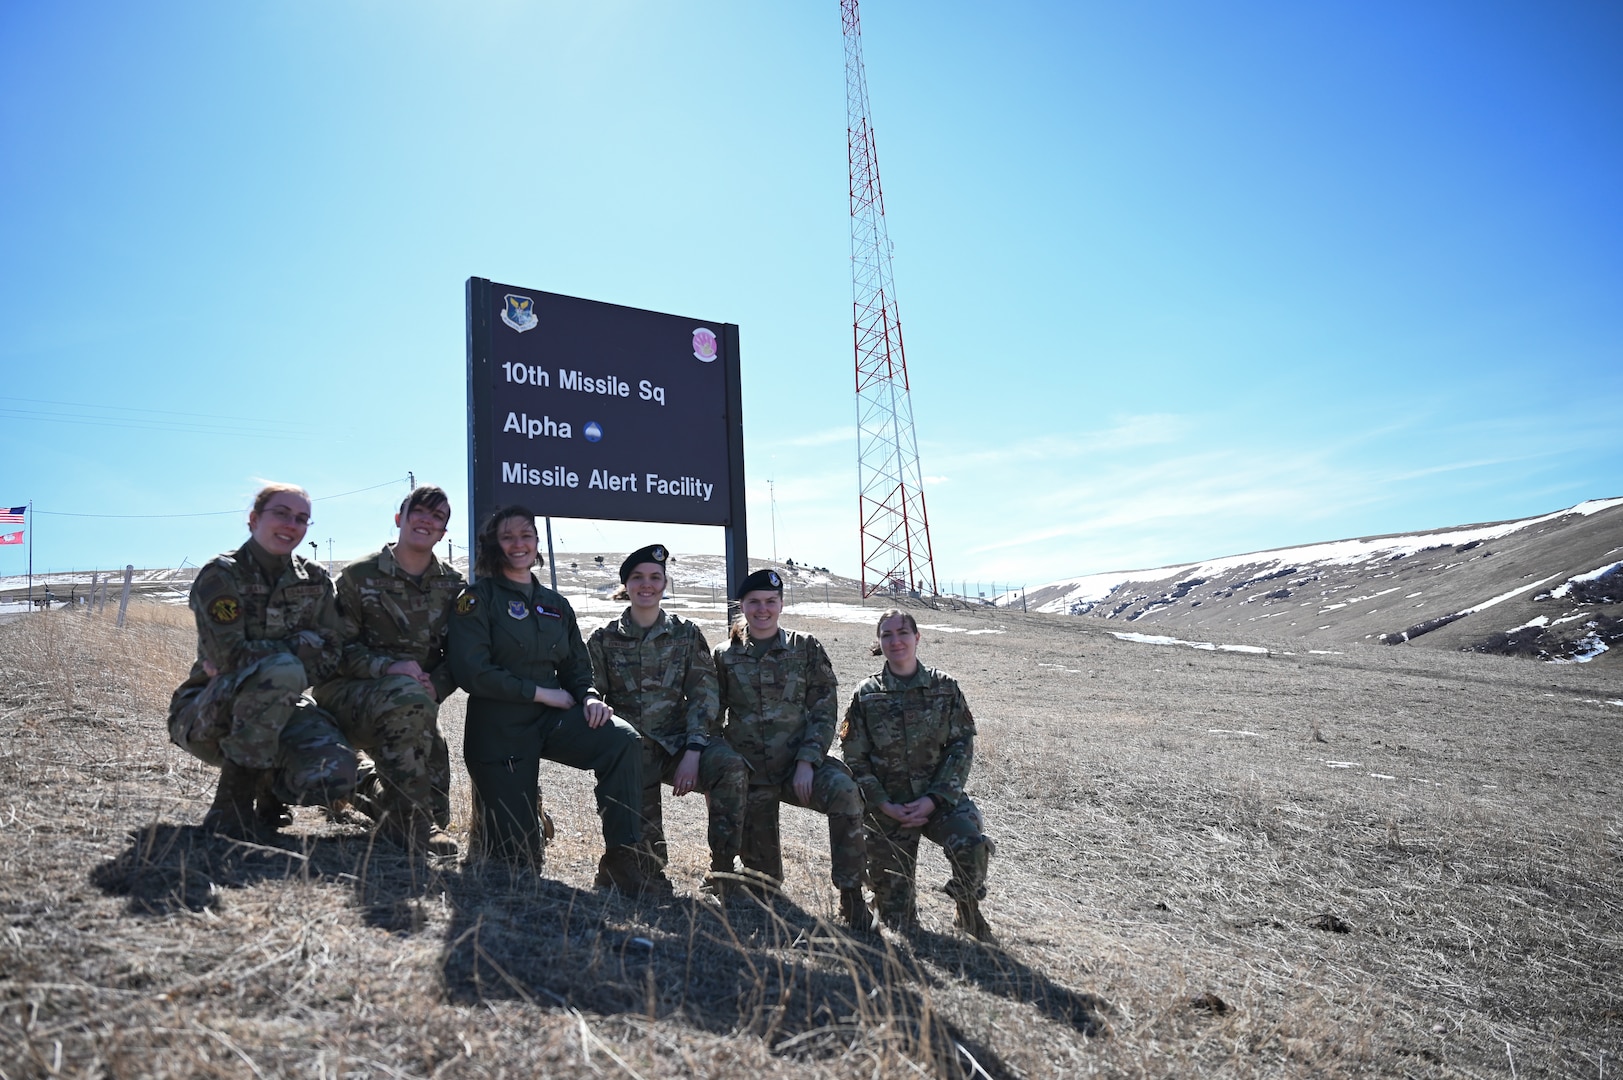 Six women in military uniform kneel in front of a sign that reads "10th Missile Sq/ Alpha 01/ Missile Alert Facility."